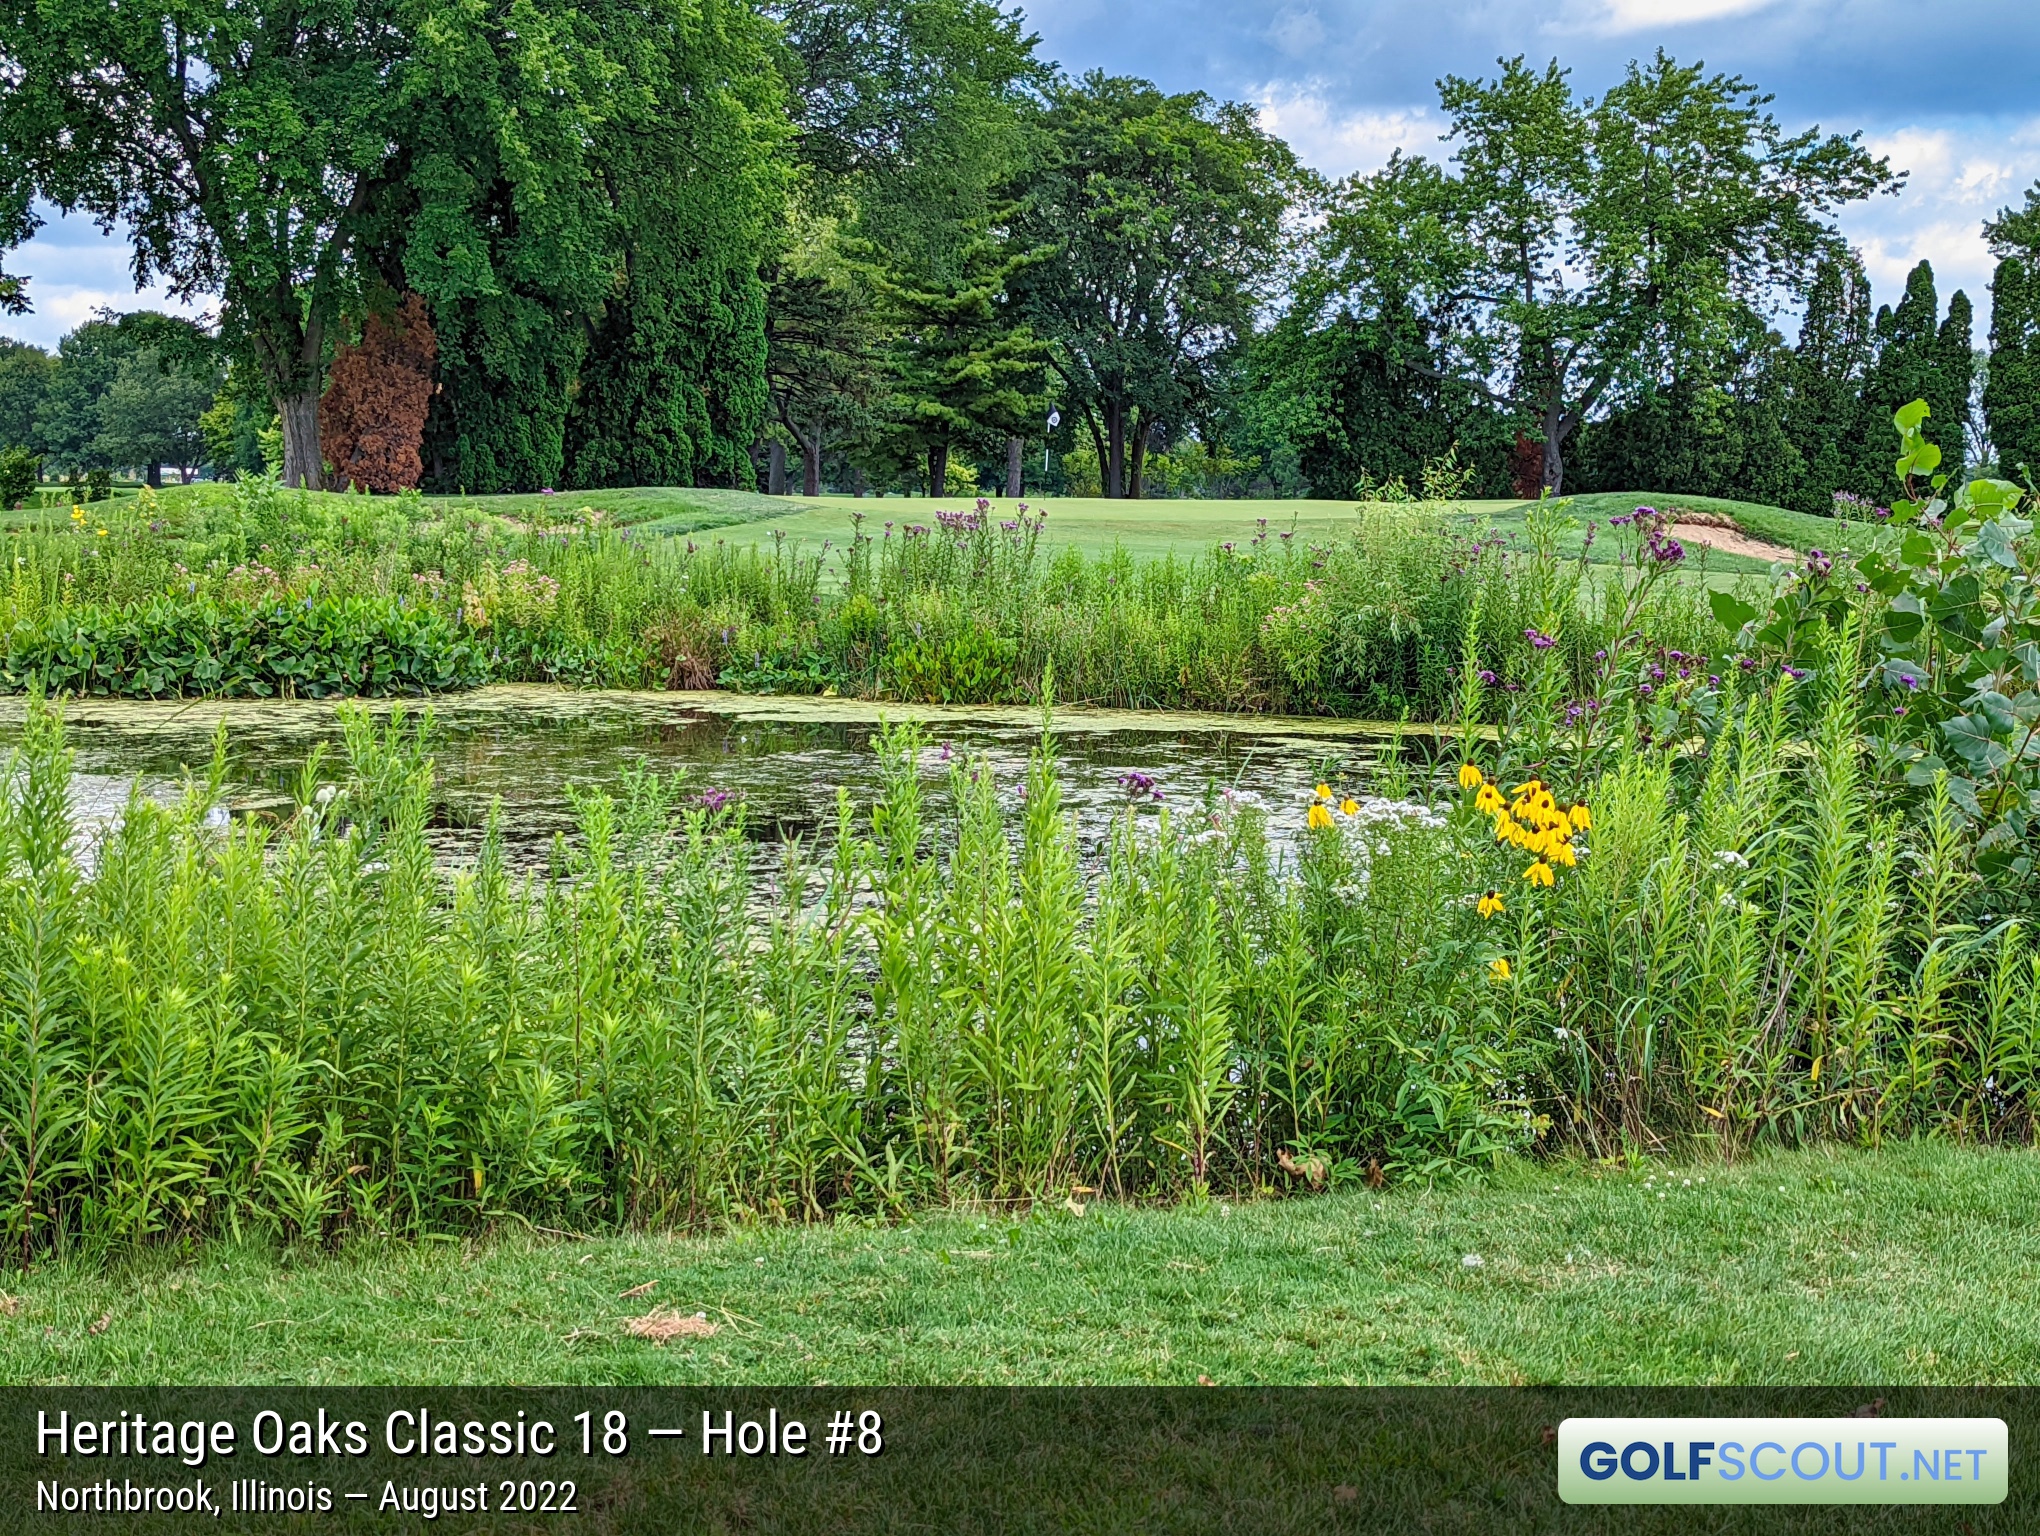 Photo of hole #8 at Heritage Oaks Golf Club - Classic 18 in Northbrook, Illinois. 